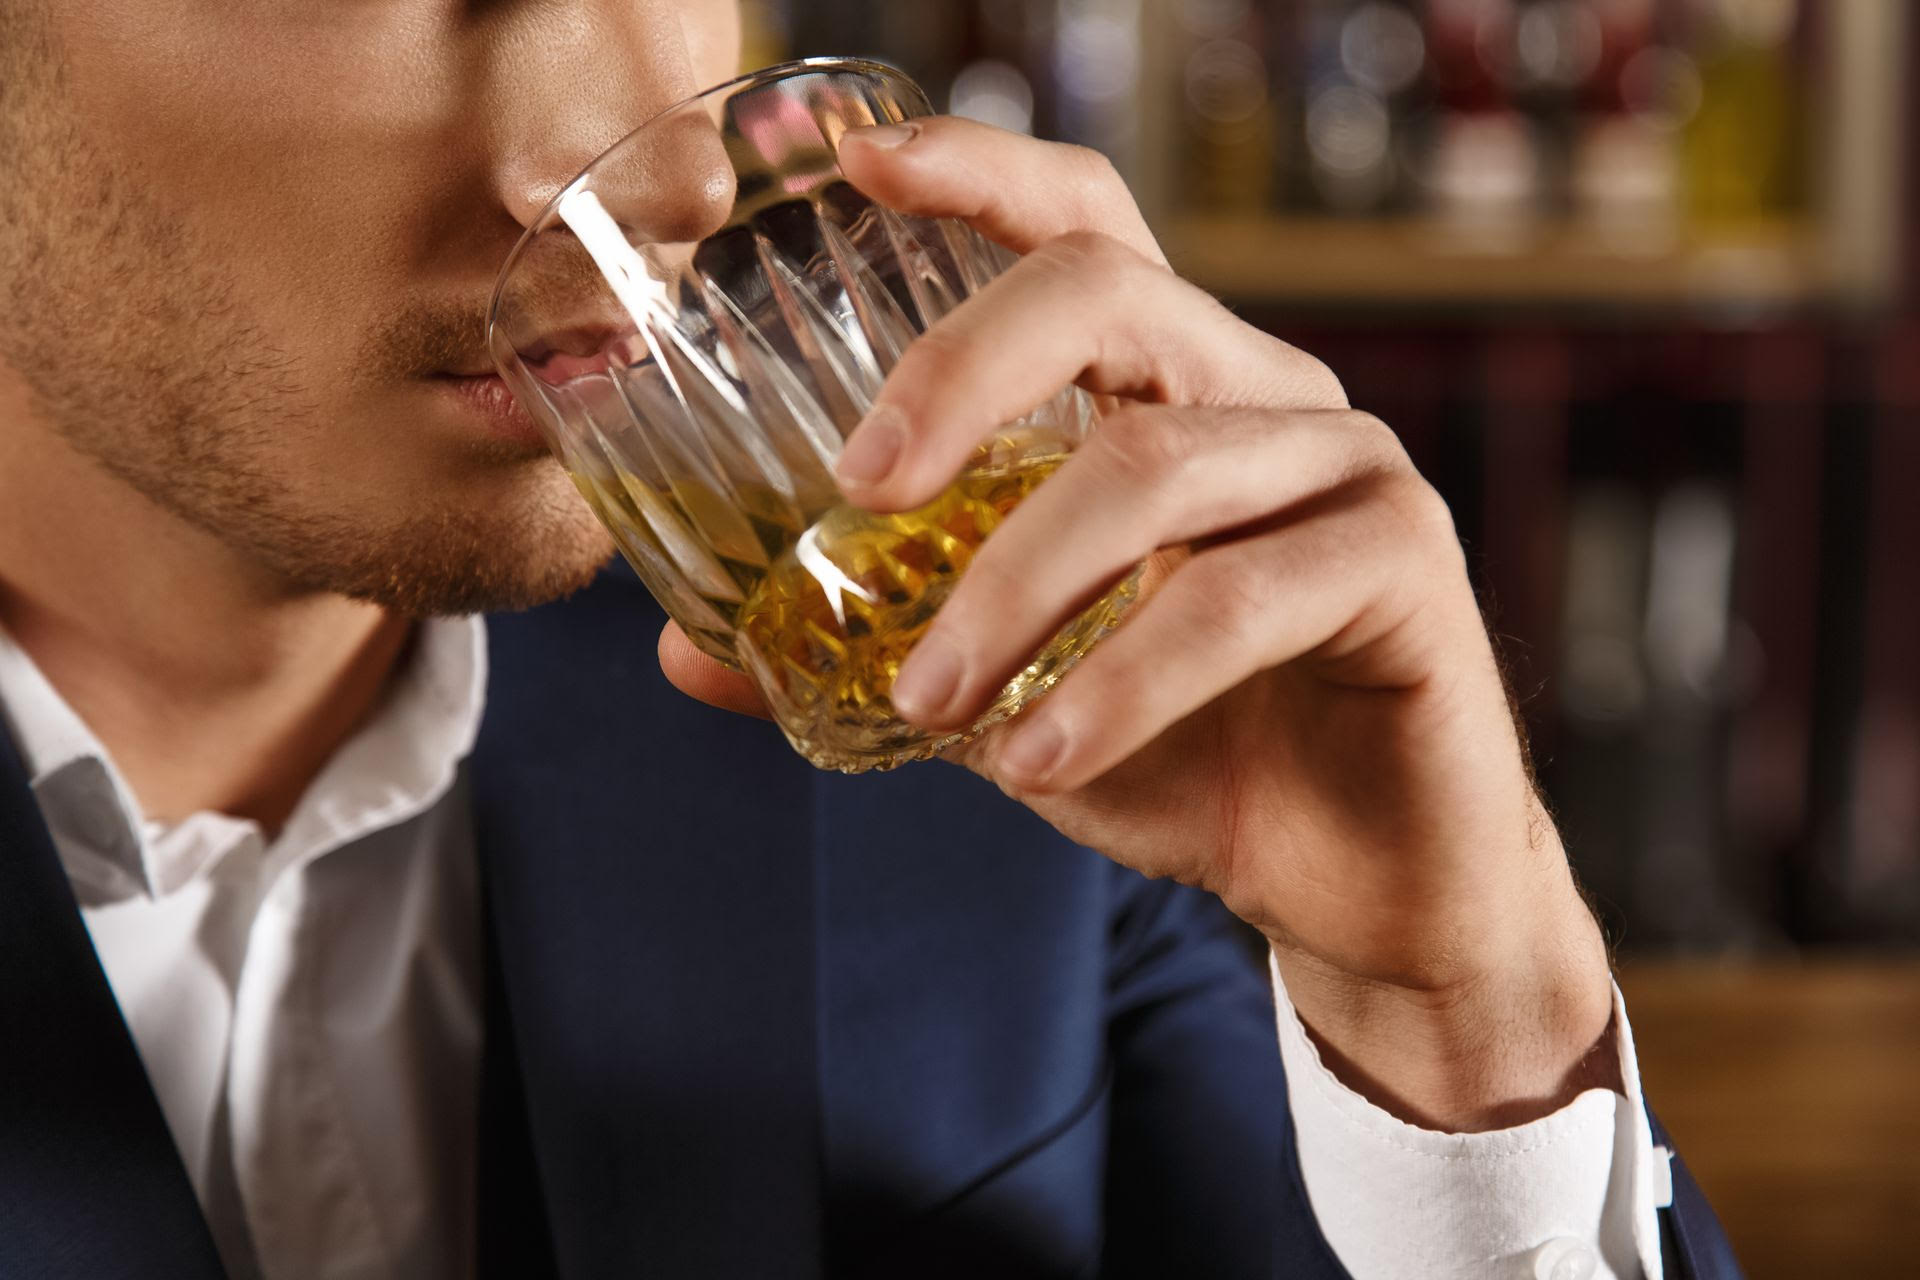 people think of alcoholics as someone who openly drinks, takes little care of themselves